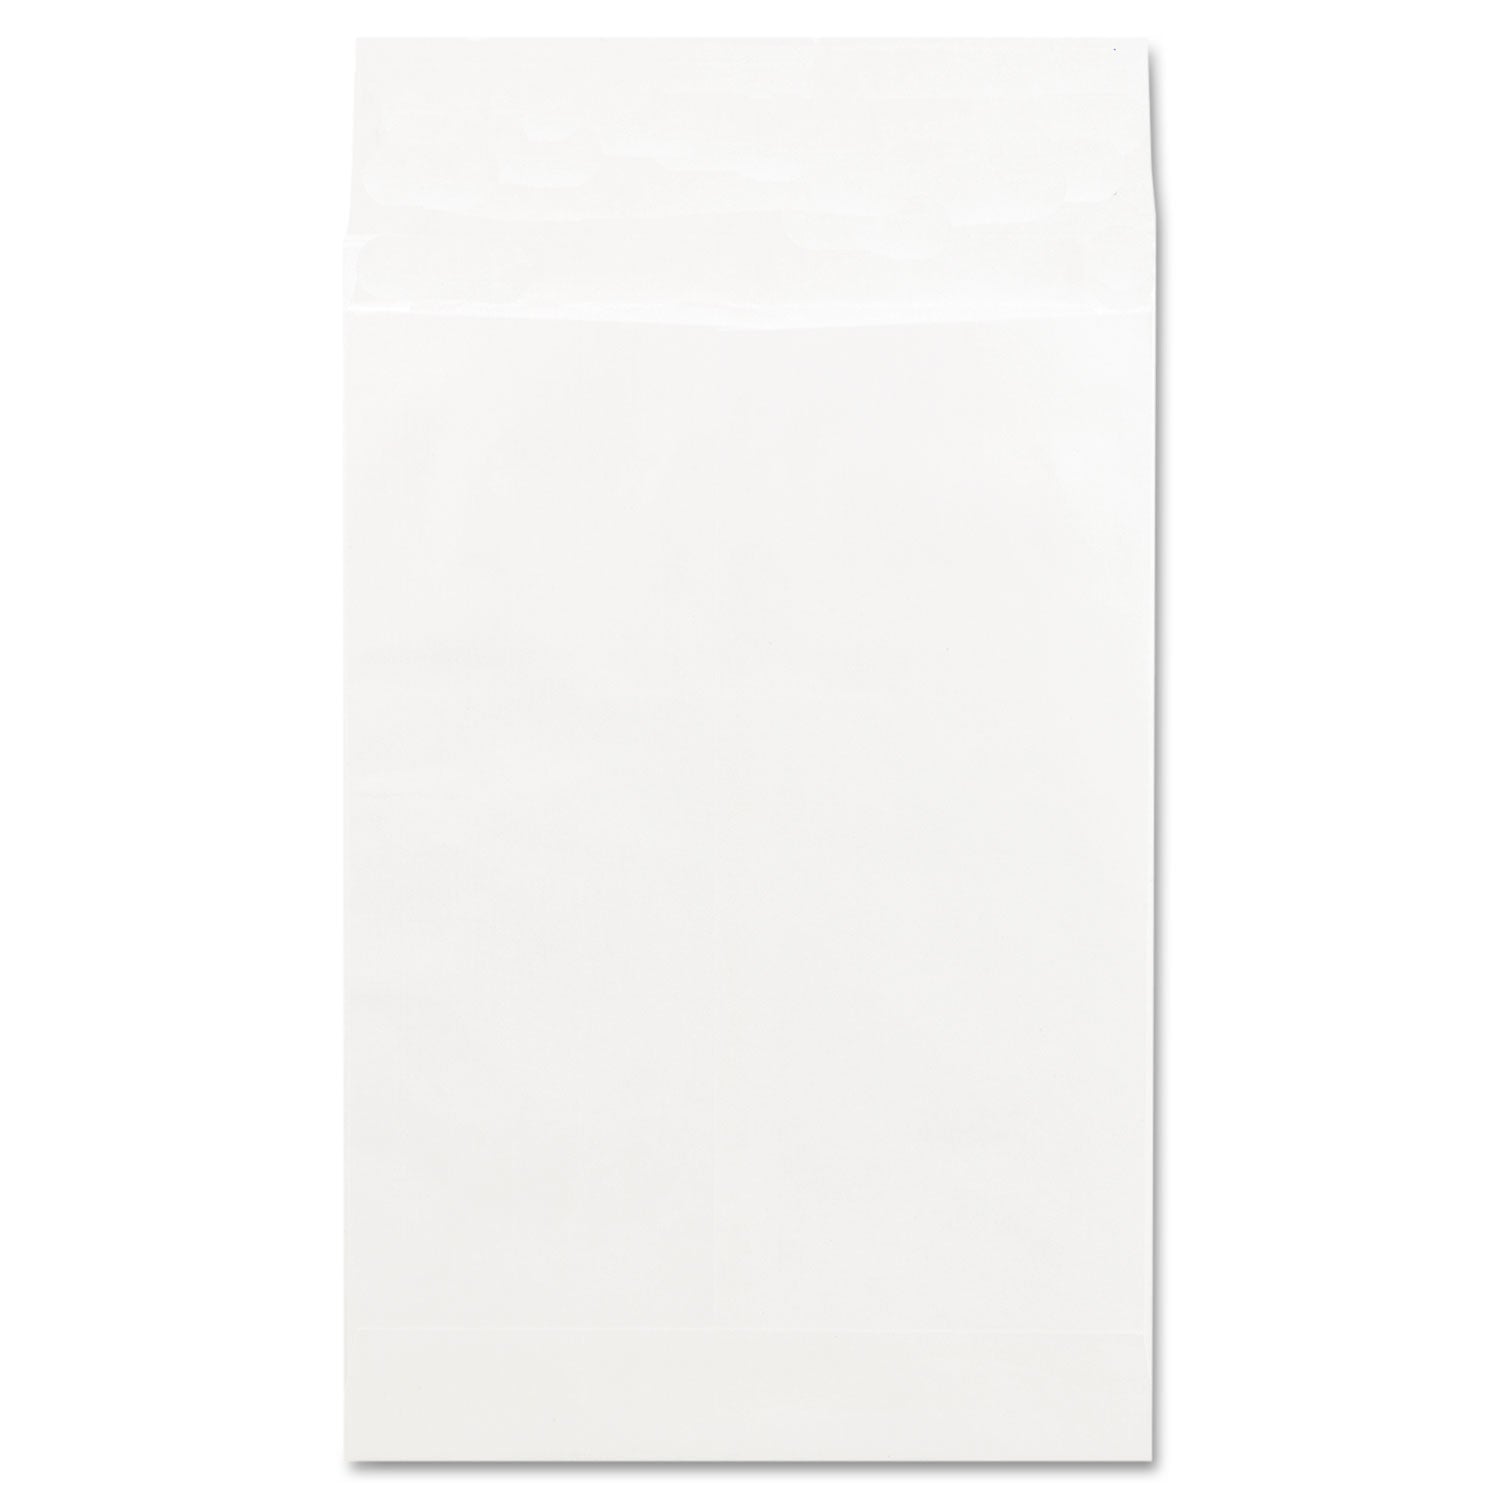 Deluxe Tyvek Expansion Envelopes, Open-End, 2" Capacity, #15 1/2, Square Flap, Self-Adhesive Closure, 12 x 16, White, 100/Box - 